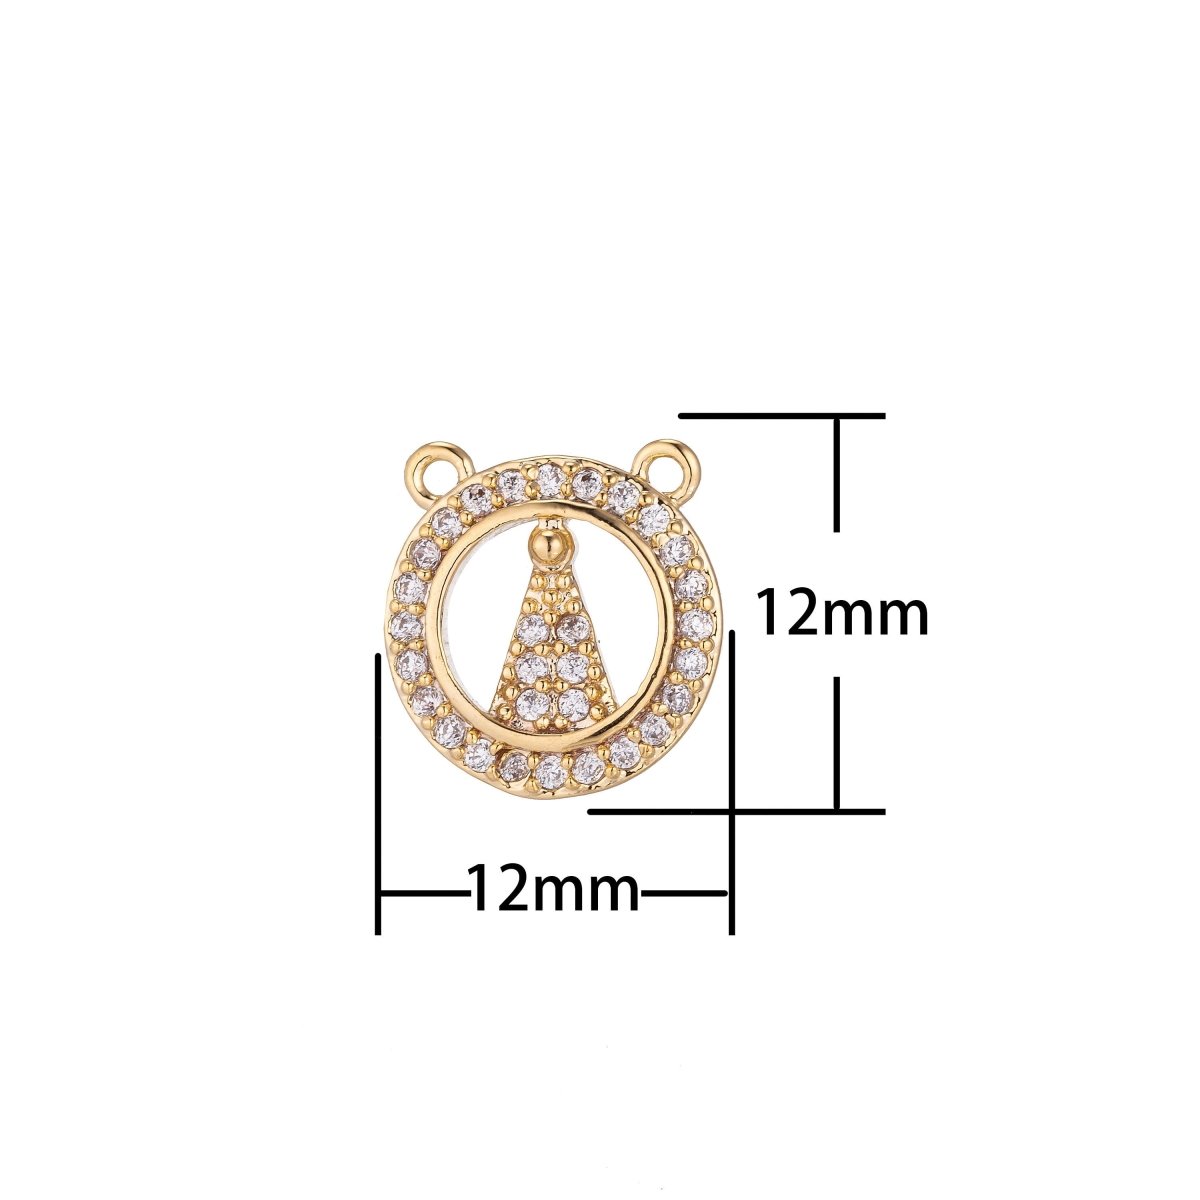 Geometric Round Bracelet Connector, 18K Gold Filled Micro Pave CZ Charm, Dainty Pendant Mountain Triangle Necklace Charm for Jewelry Making F-233 - DLUXCA